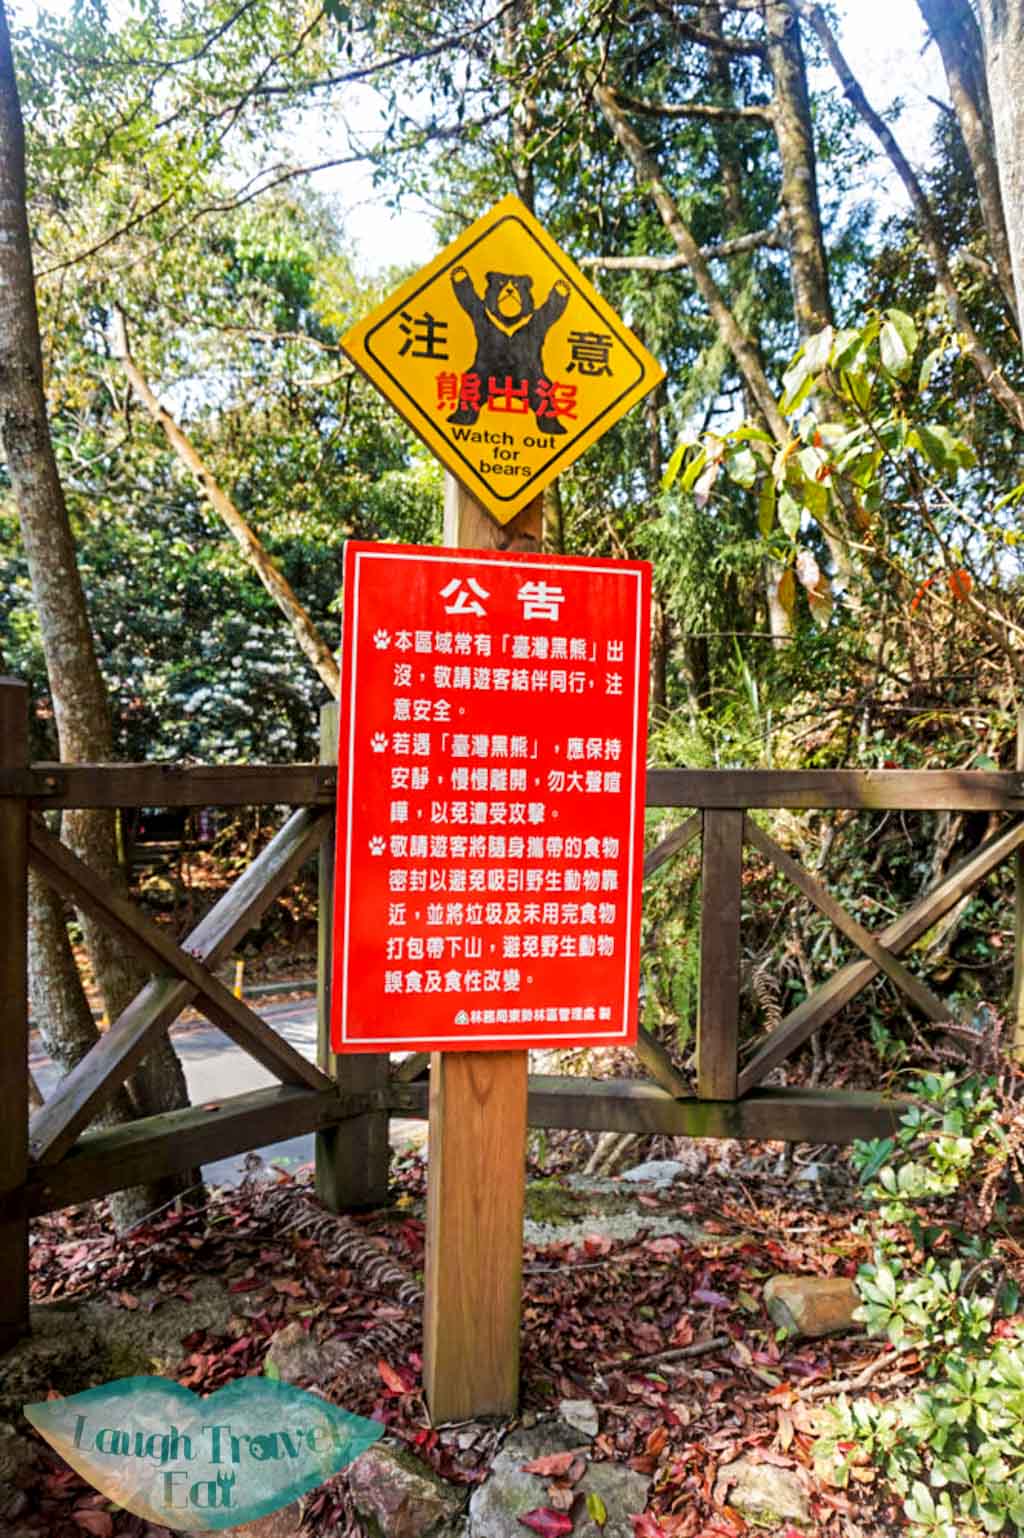 Bear warning sign at the start of Yuan Zui Mountain Trail in Taichung - Laugh Travel Eat